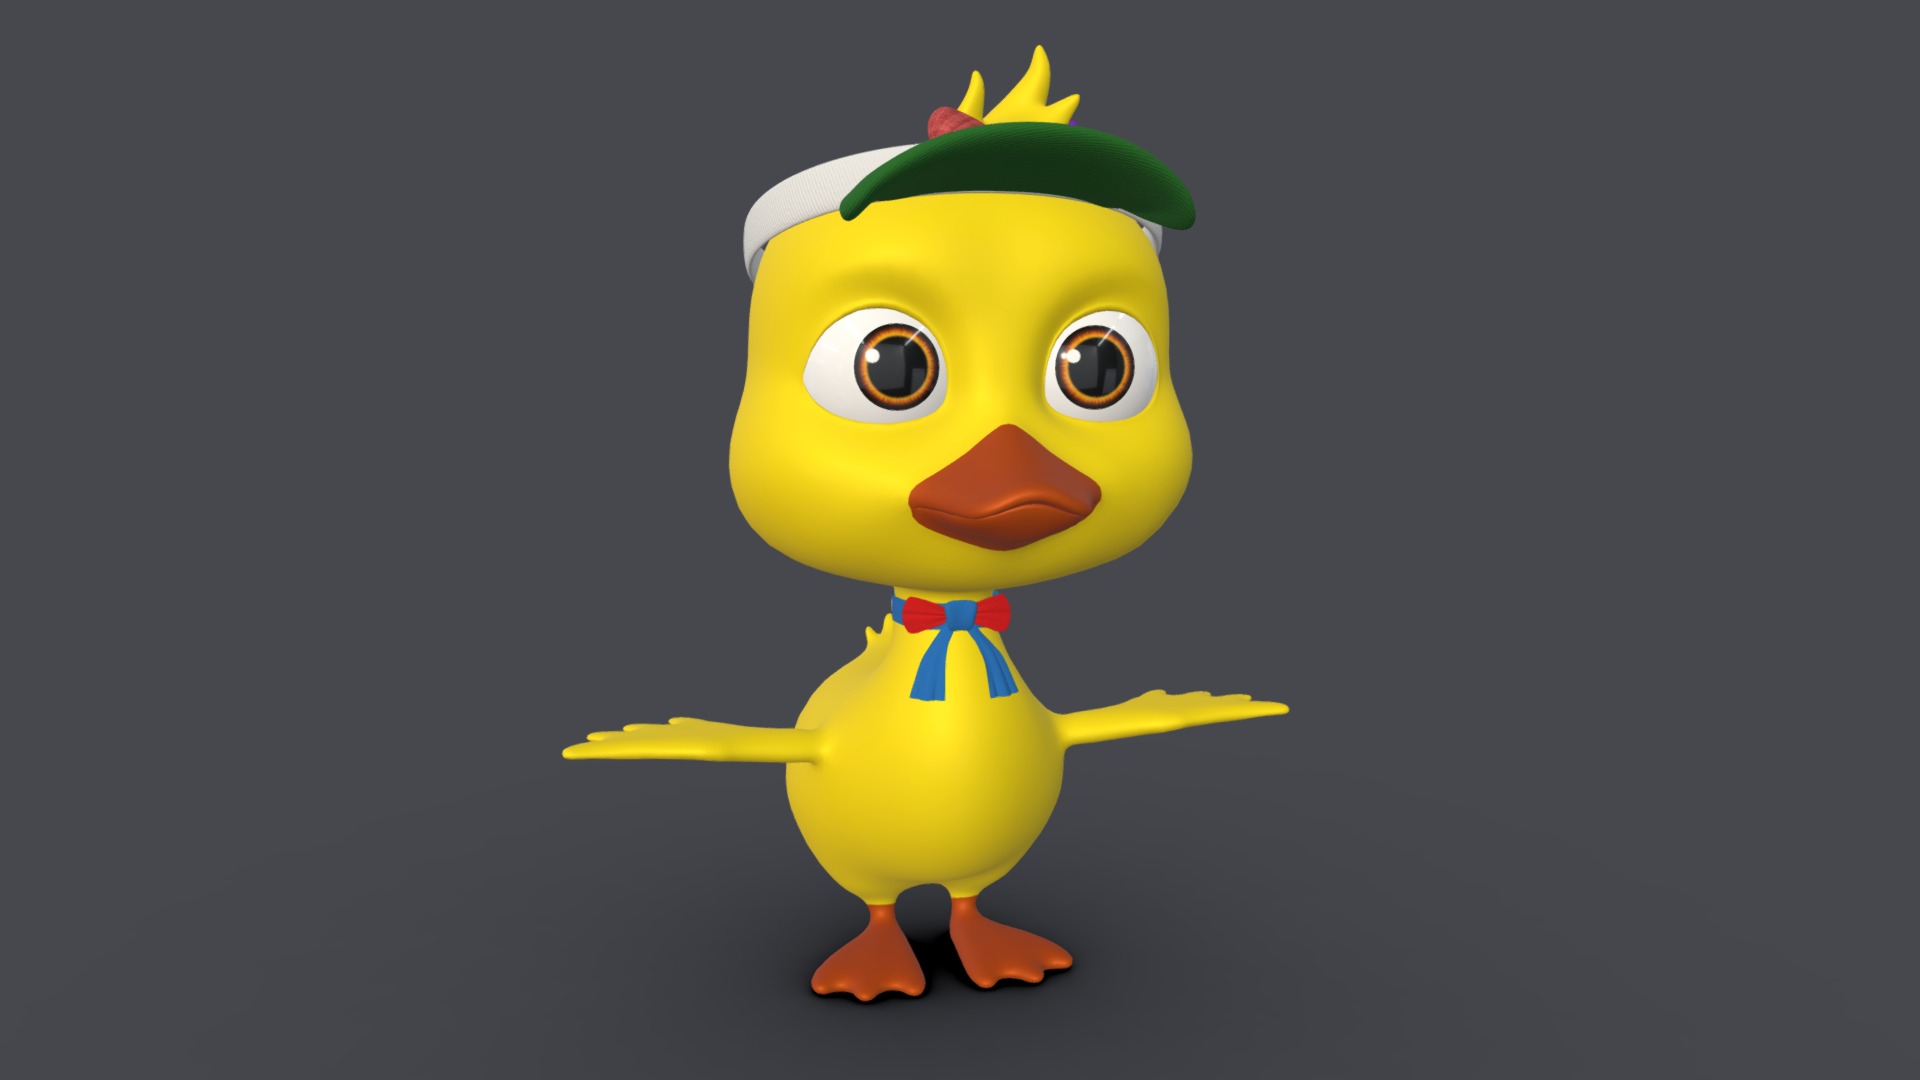 3D model Asset – Cartoons – Character – Duck – Rig - This is a 3D model of the Asset - Cartoons - Character - Duck - Rig. The 3D model is about icon.